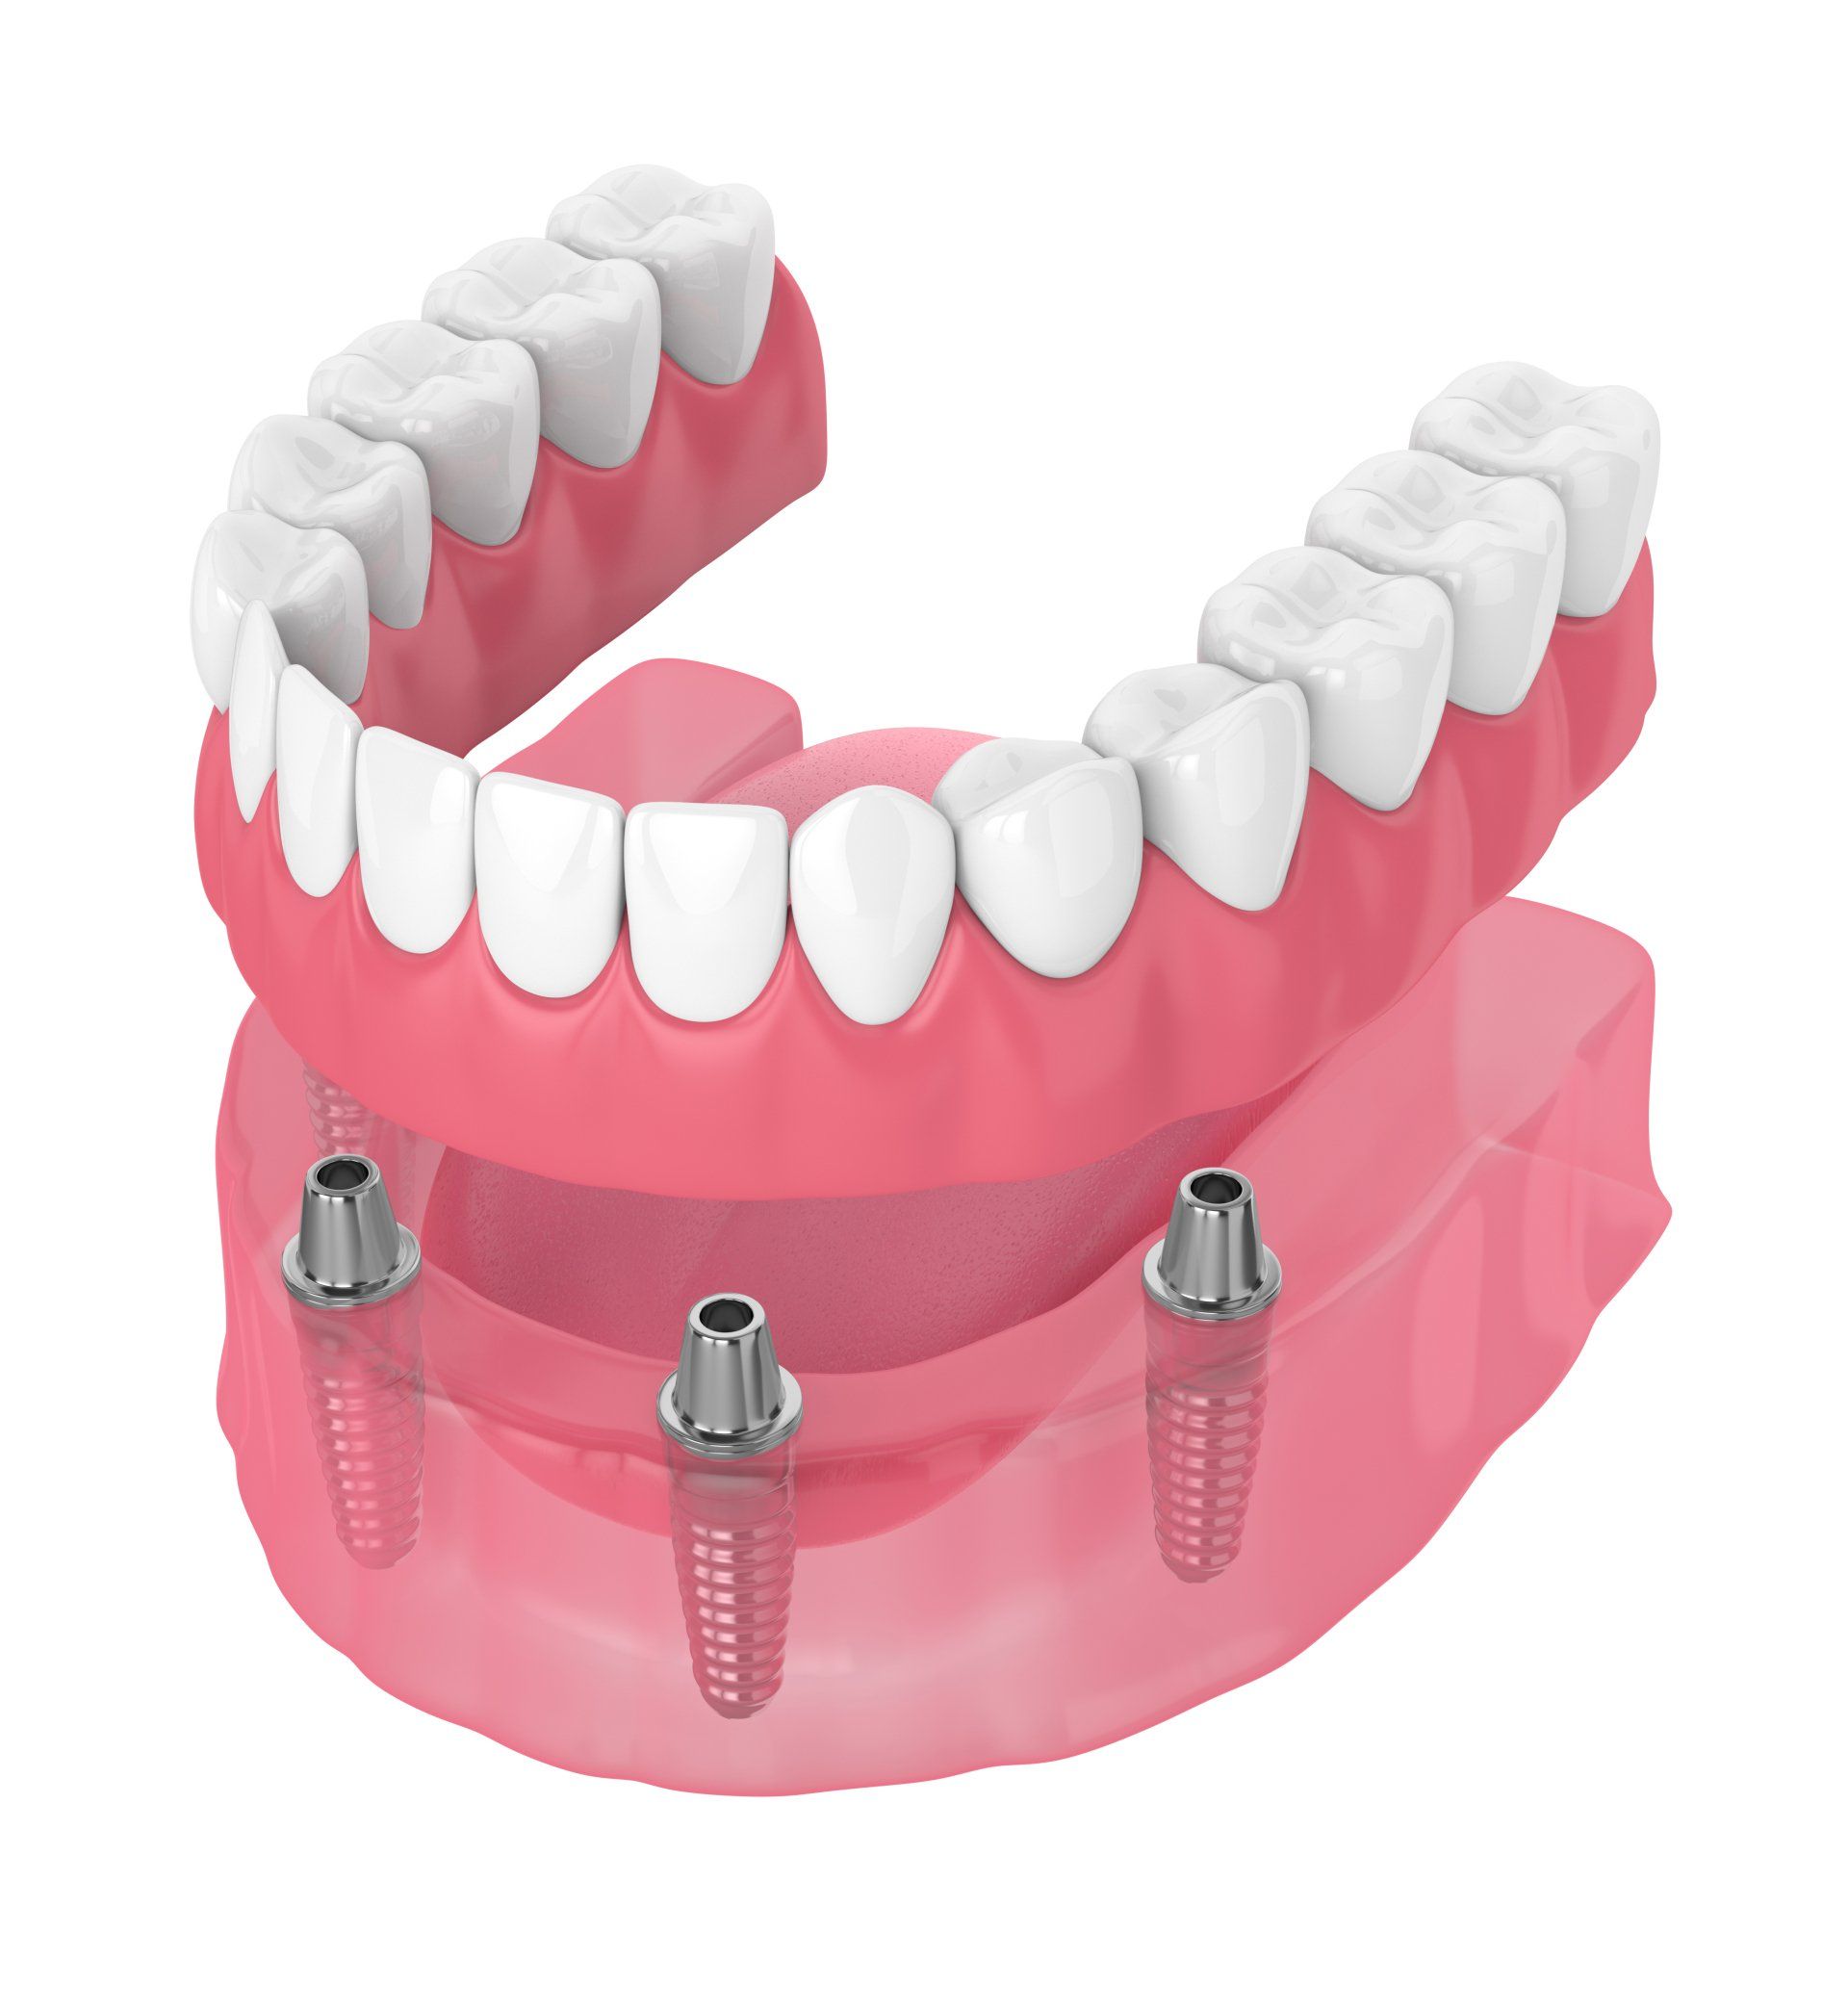 model of snap-on dentures and how they work